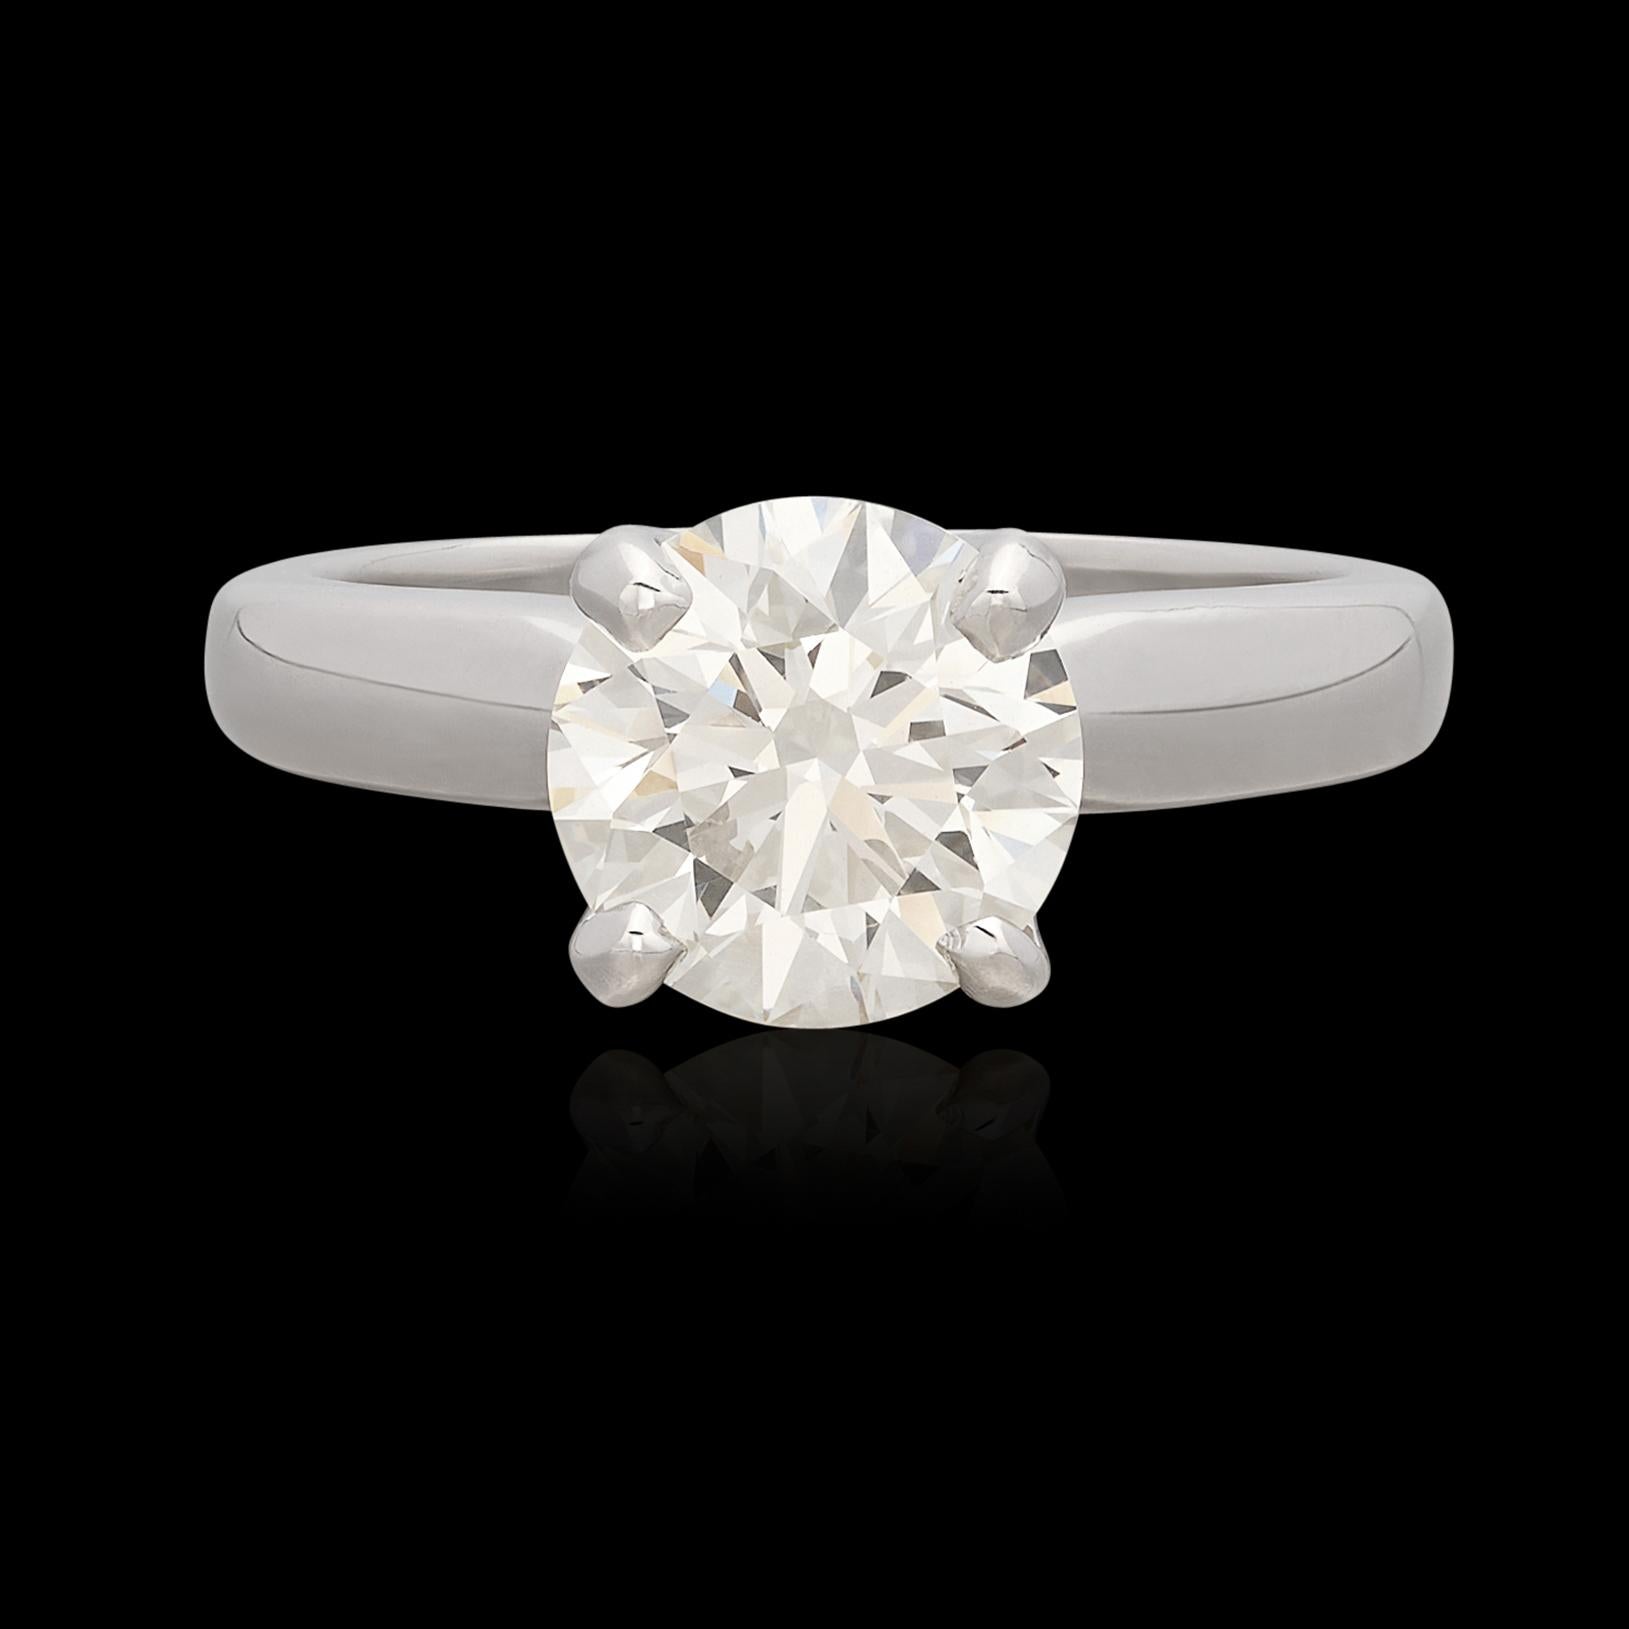 An eye-catching solitaire diamond engagement ring that is sure to impress! This platinum beauty features a 3.10 carat 